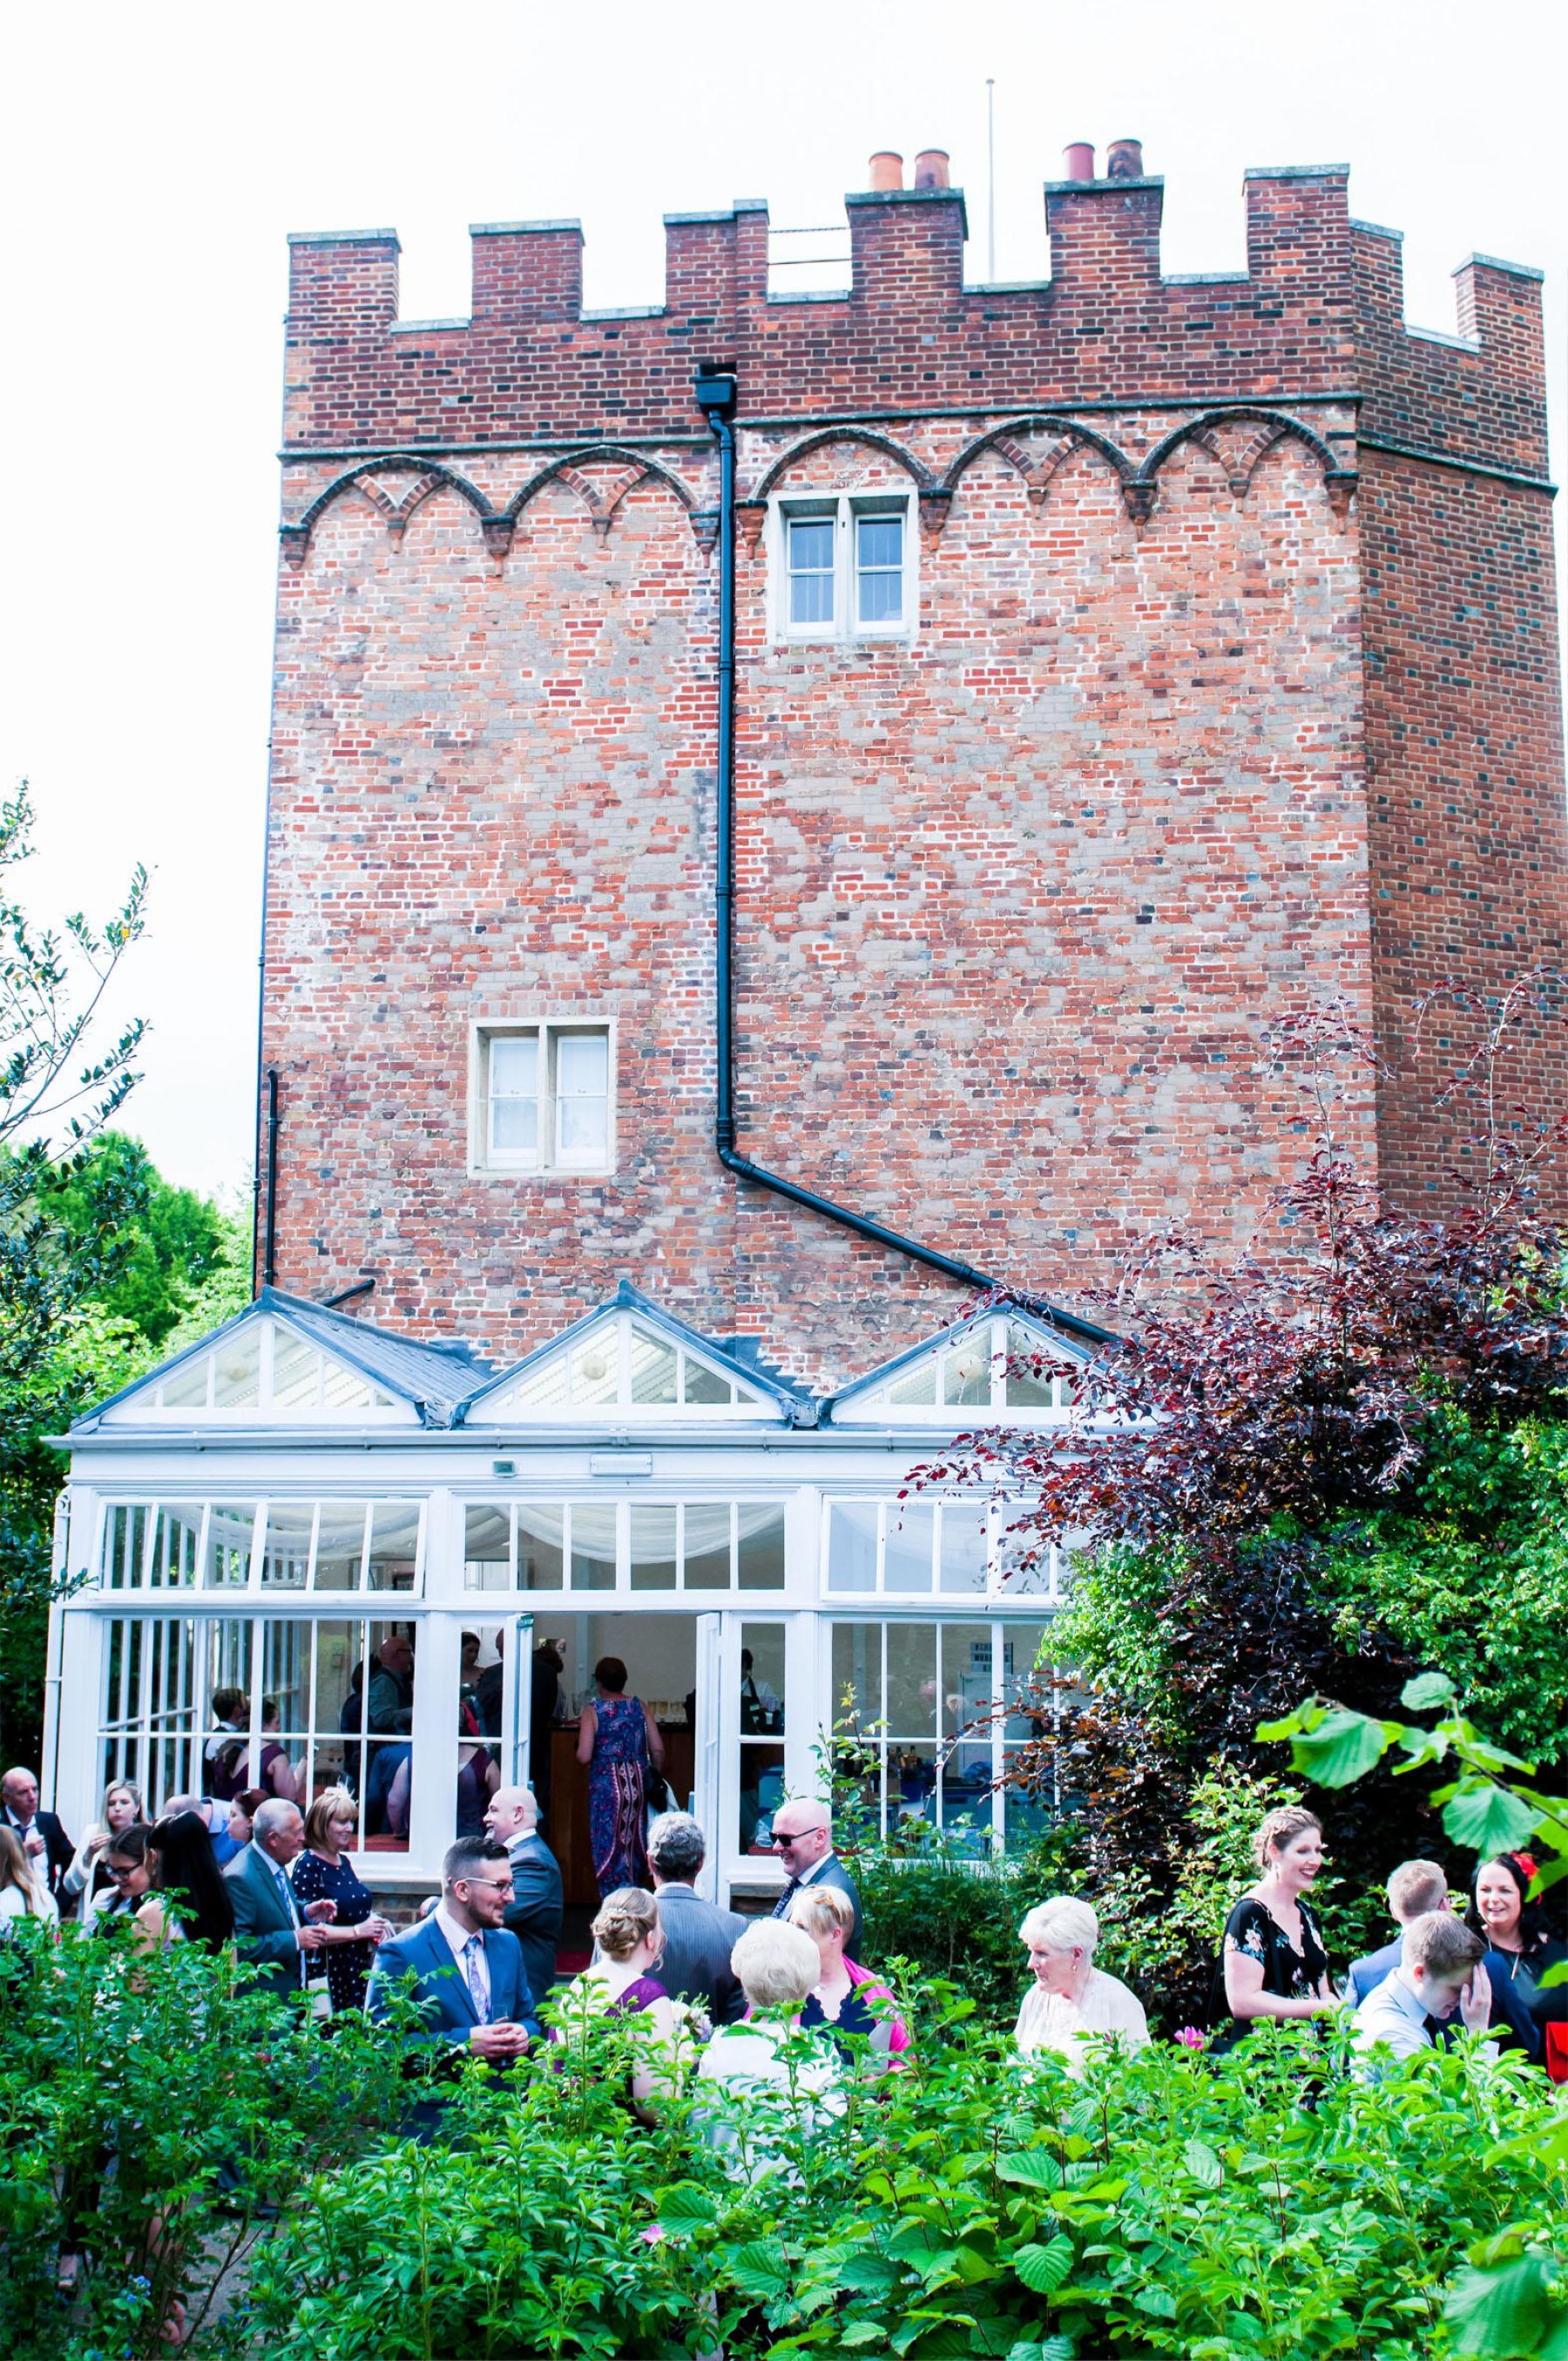 A side view of the castle with the conservatory and guests drinking and laughing together